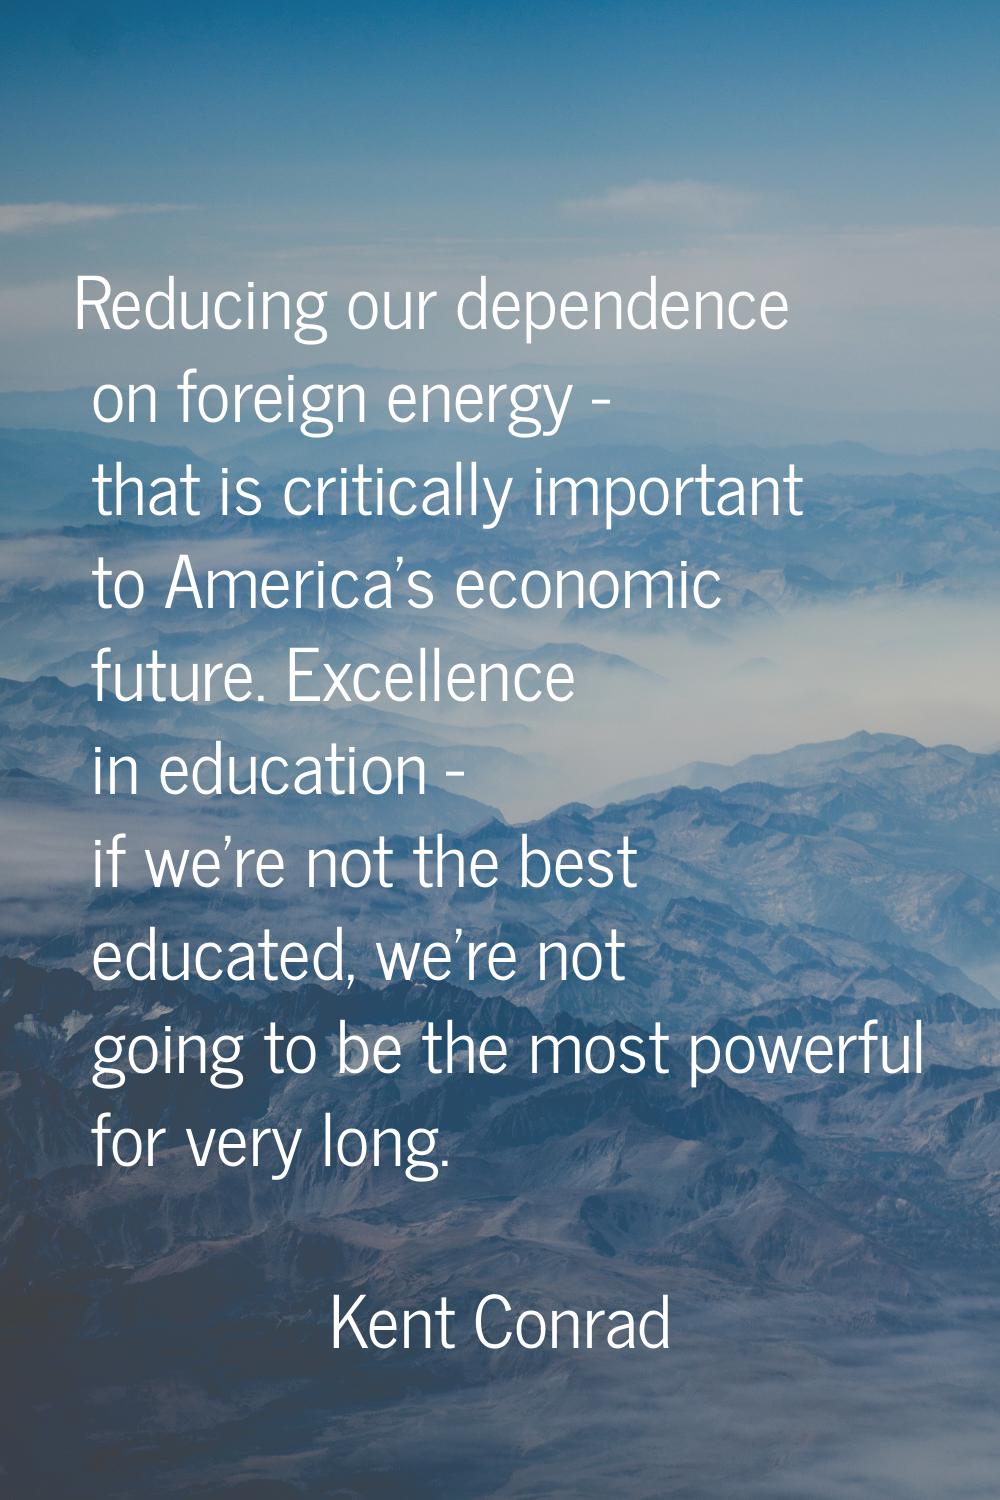 Reducing our dependence on foreign energy - that is critically important to America's economic futu